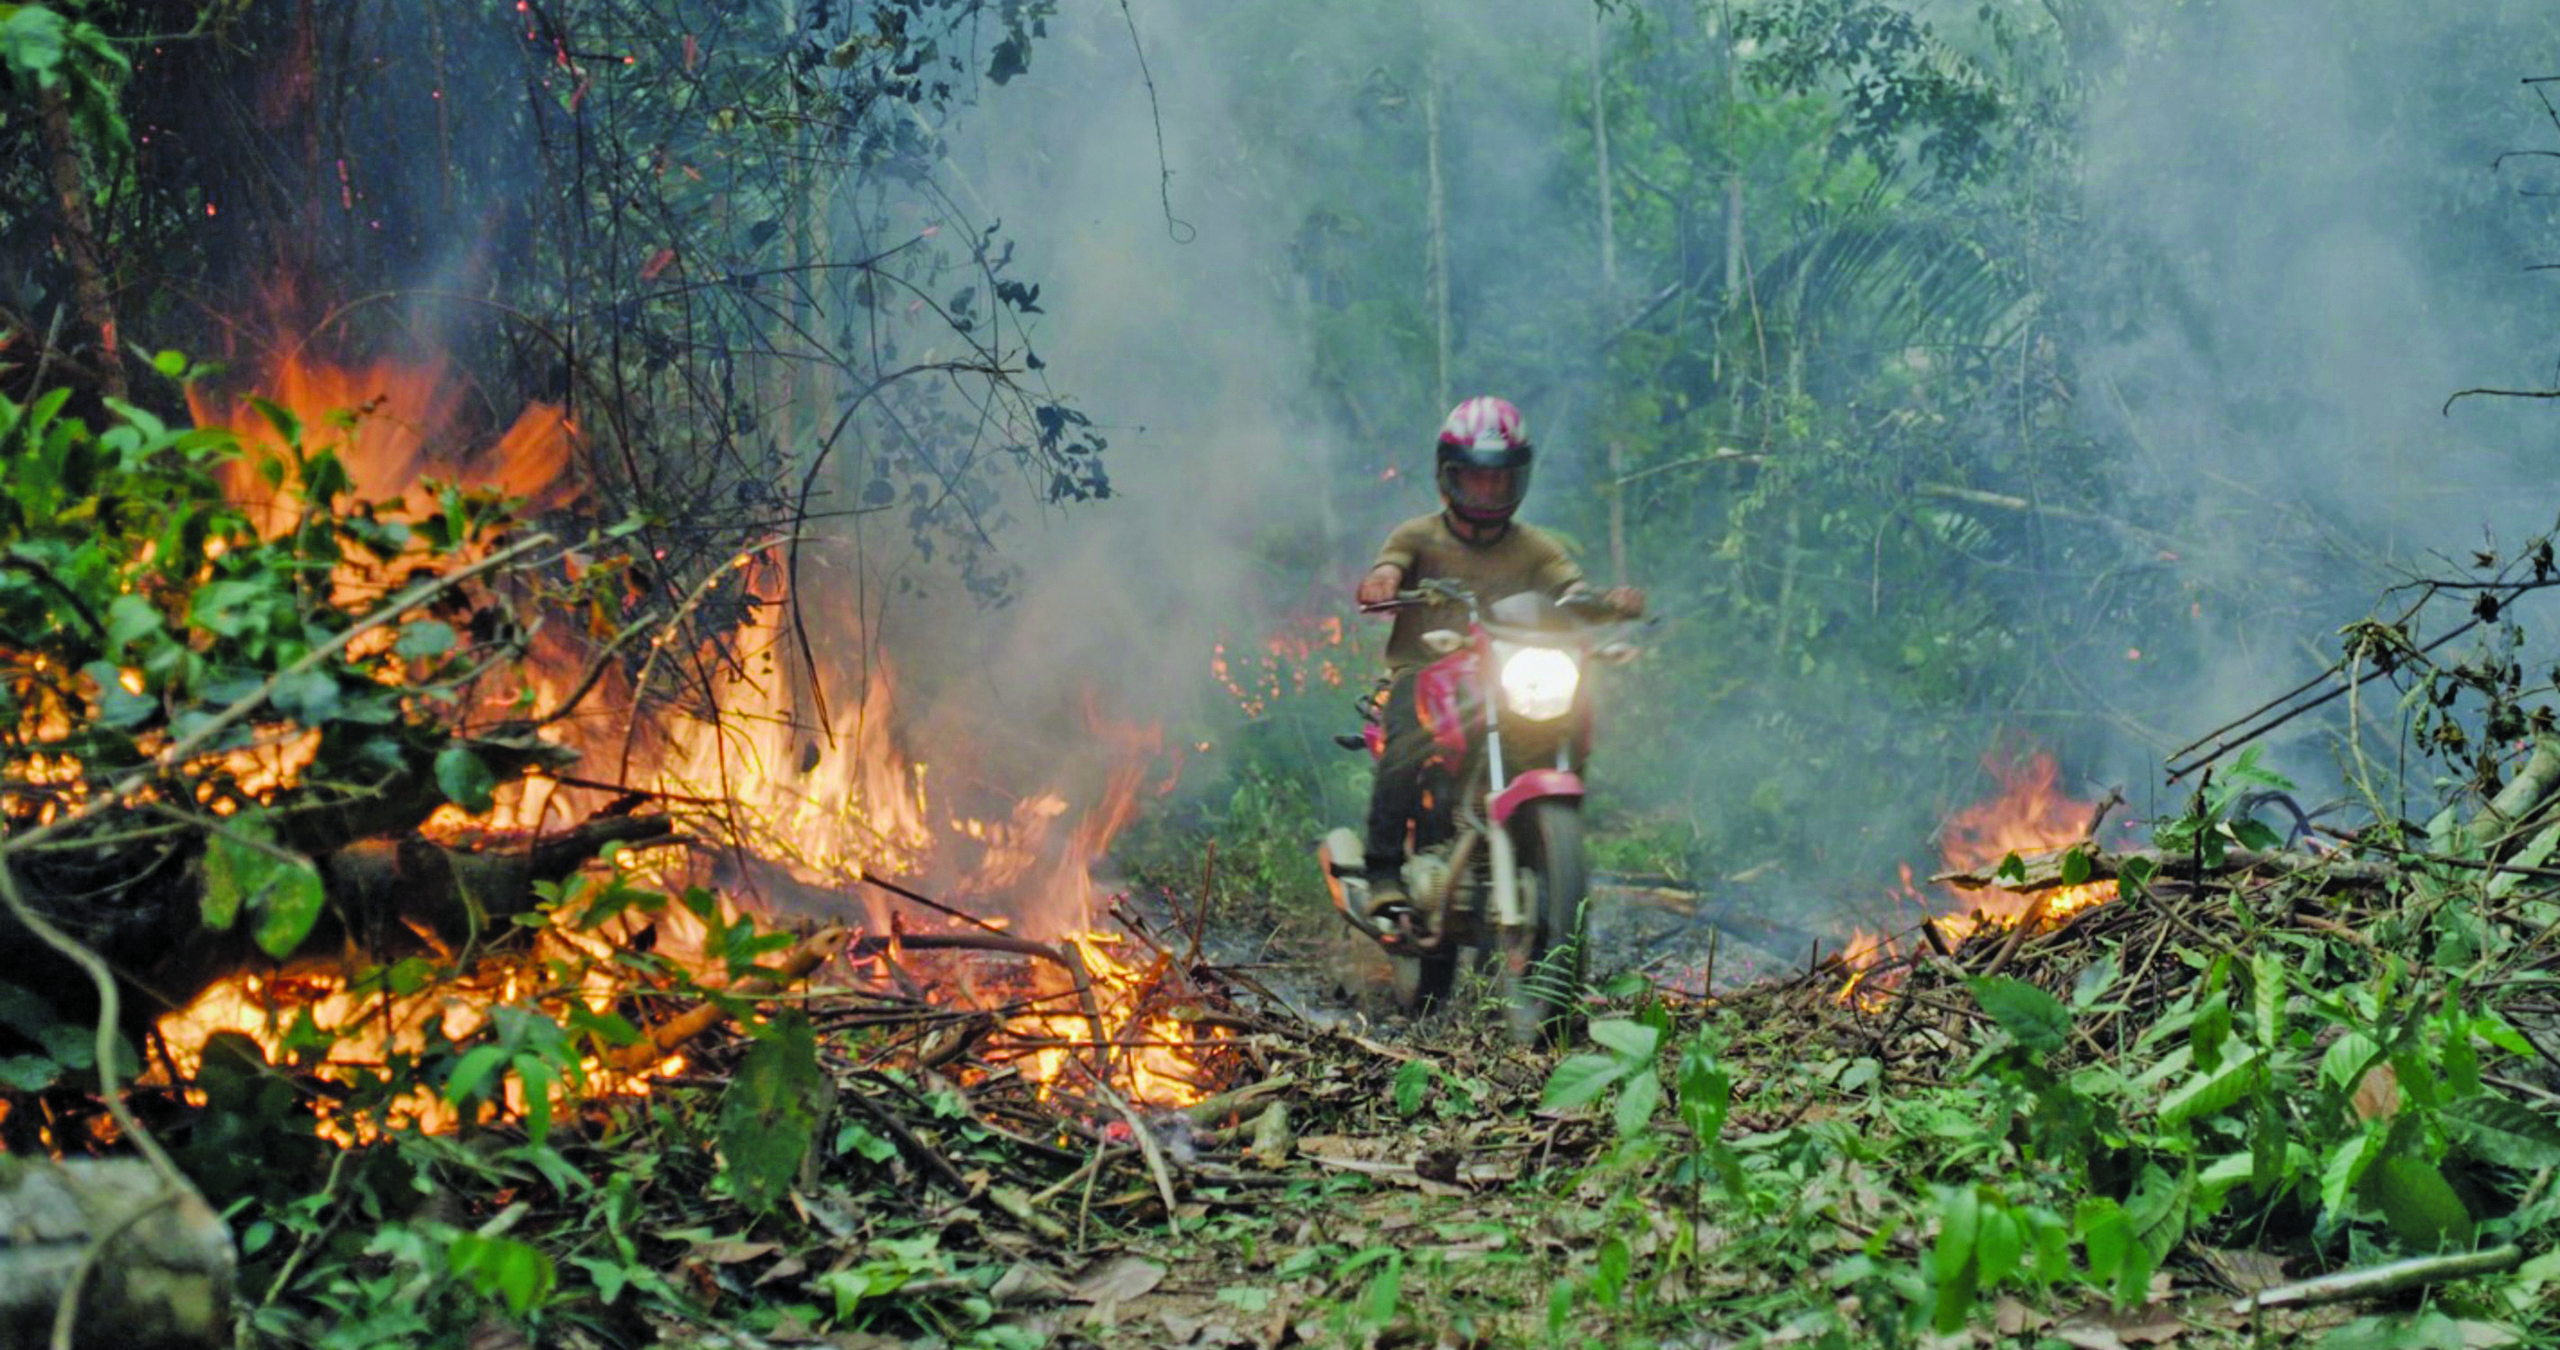 A helmeted person on a motorbike rides through burning foliage.